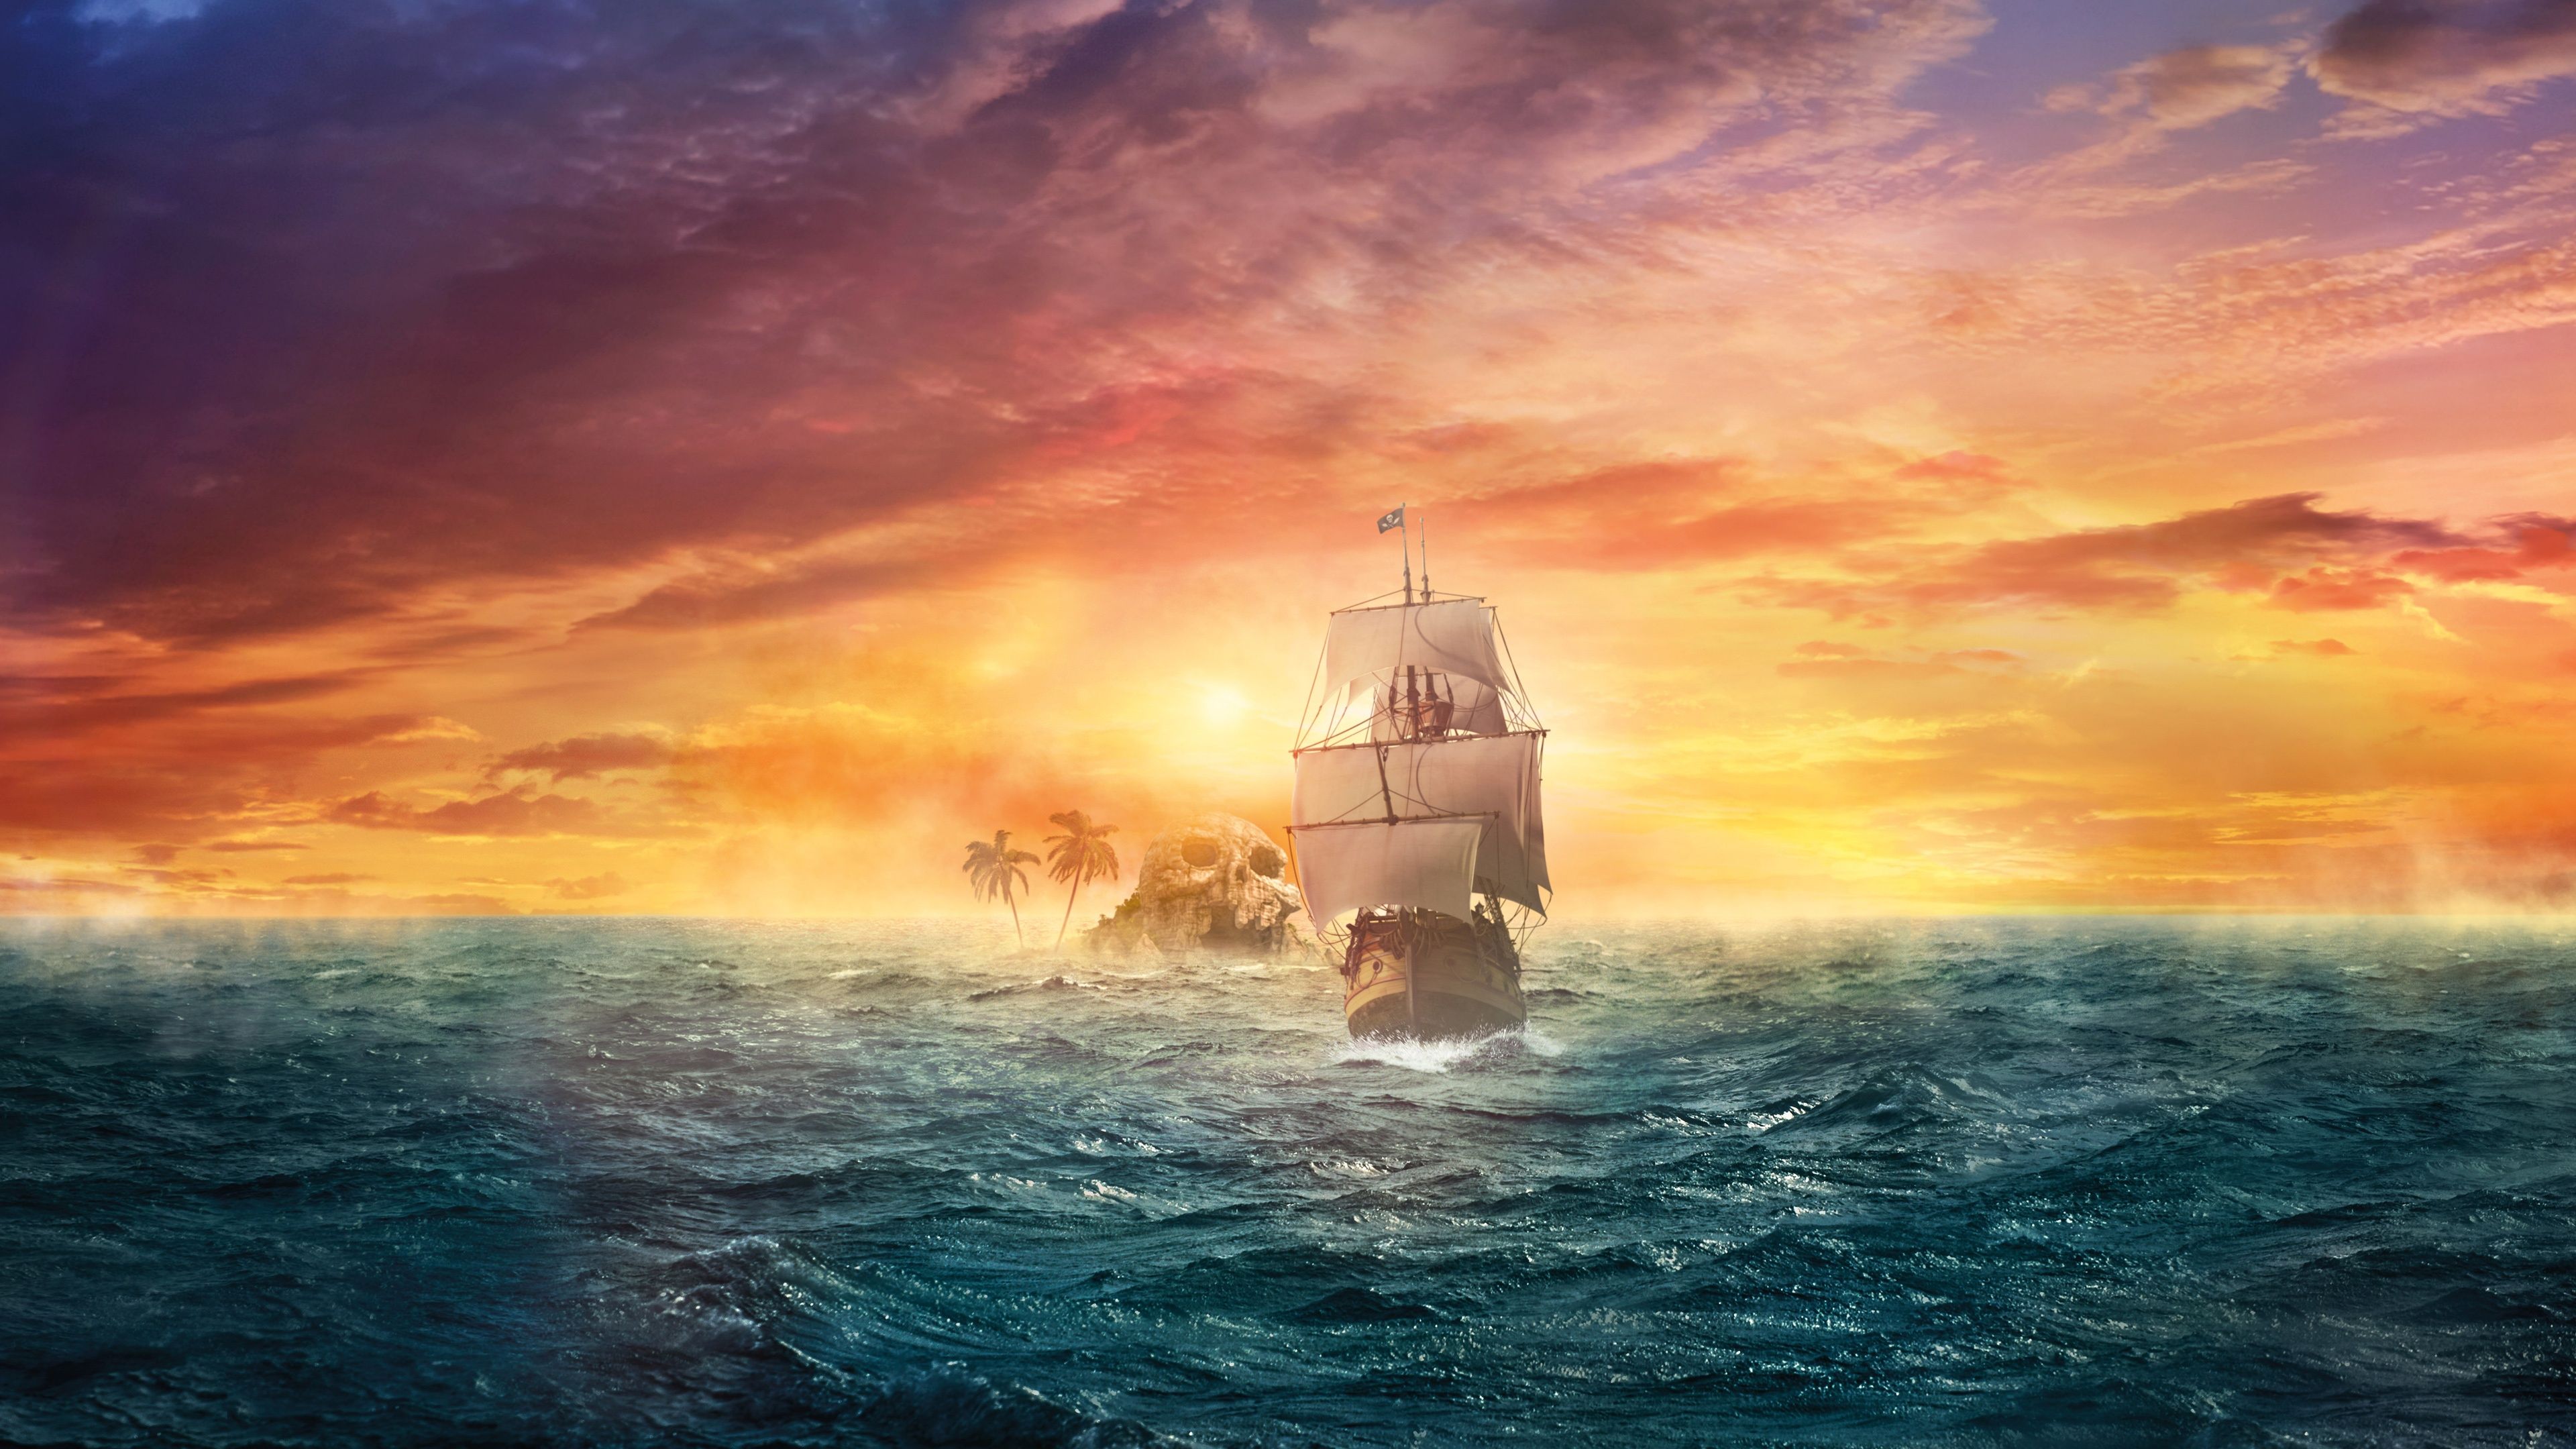 A ship sailing in the middle of the ocean during a sunset - Pirate